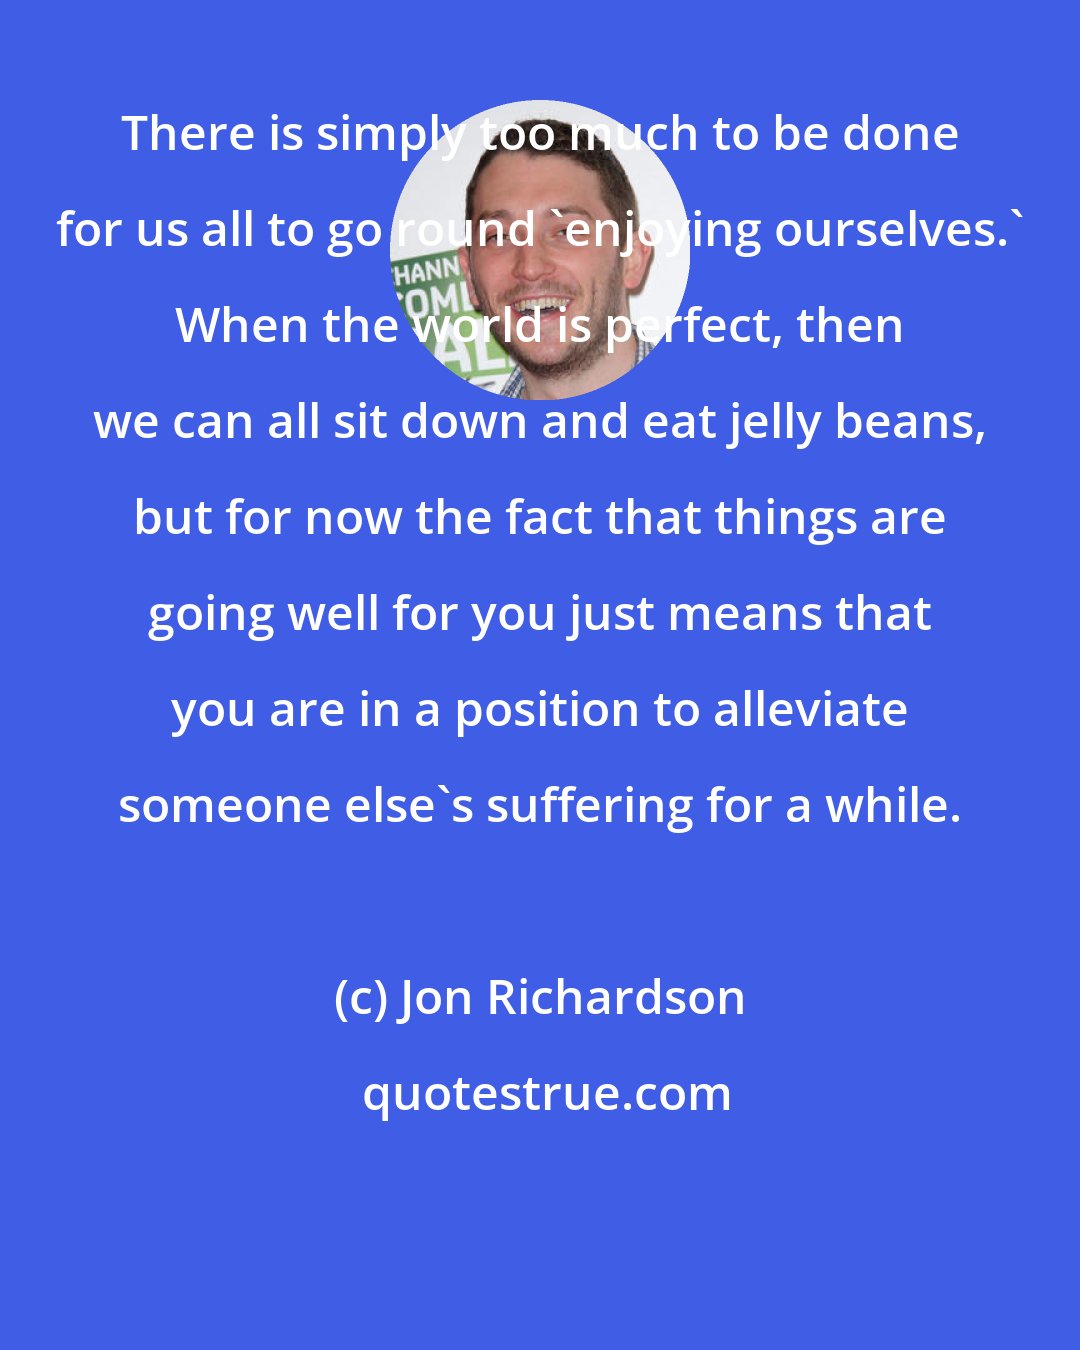 Jon Richardson: There is simply too much to be done for us all to go round 'enjoying ourselves.' When the world is perfect, then we can all sit down and eat jelly beans, but for now the fact that things are going well for you just means that you are in a position to alleviate someone else's suffering for a while.